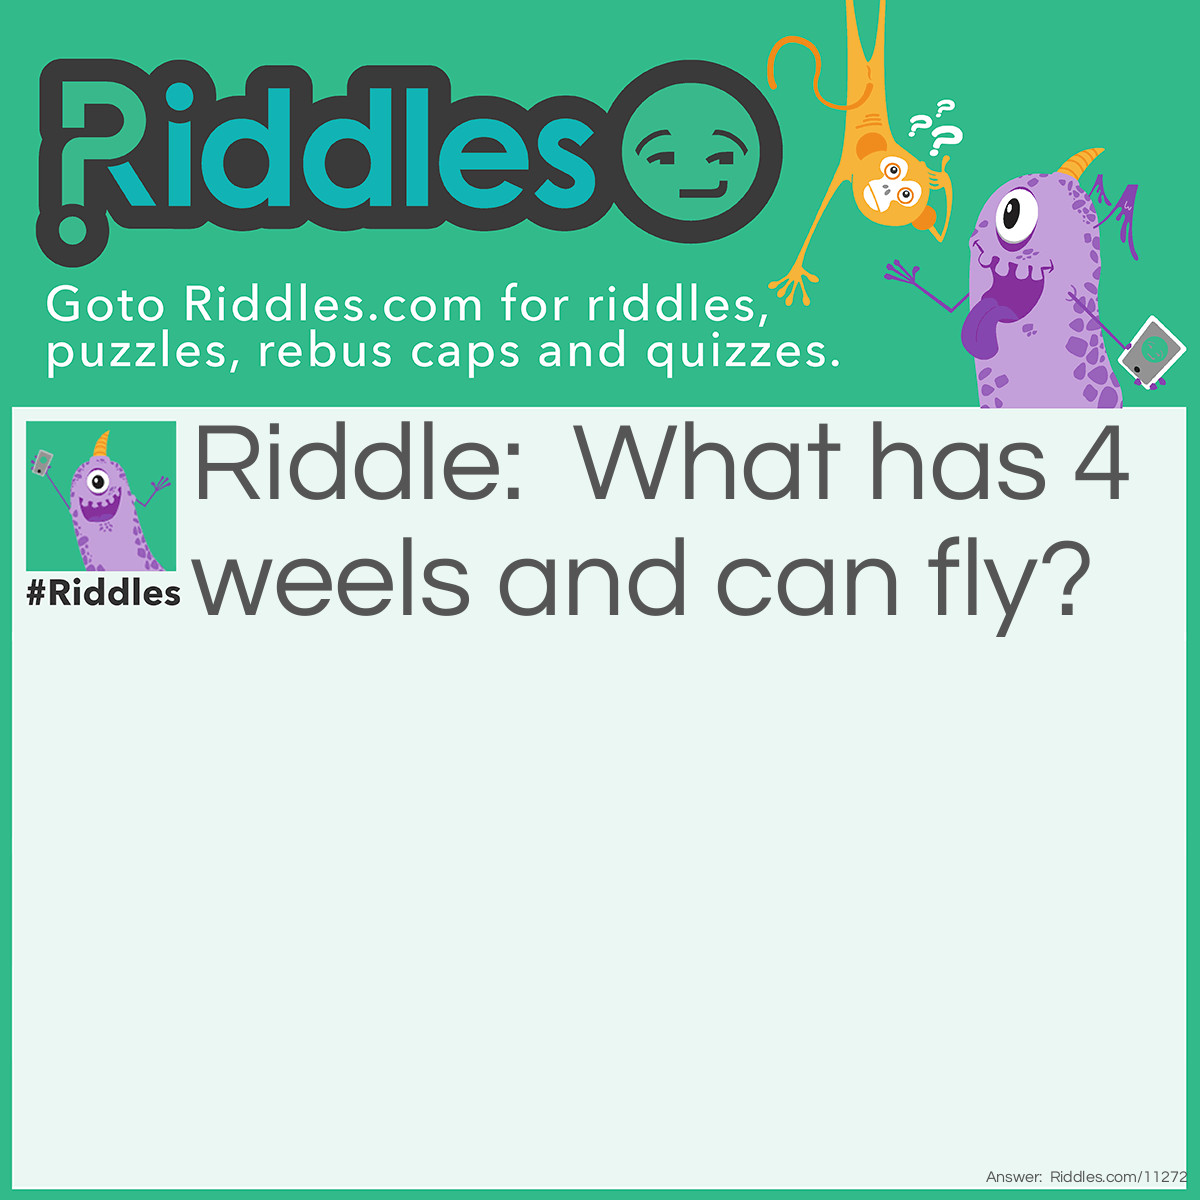 Riddle: What has 4 weels and can fly? Answer: A g.a.r.b.a.g.e t.r.u.c.k